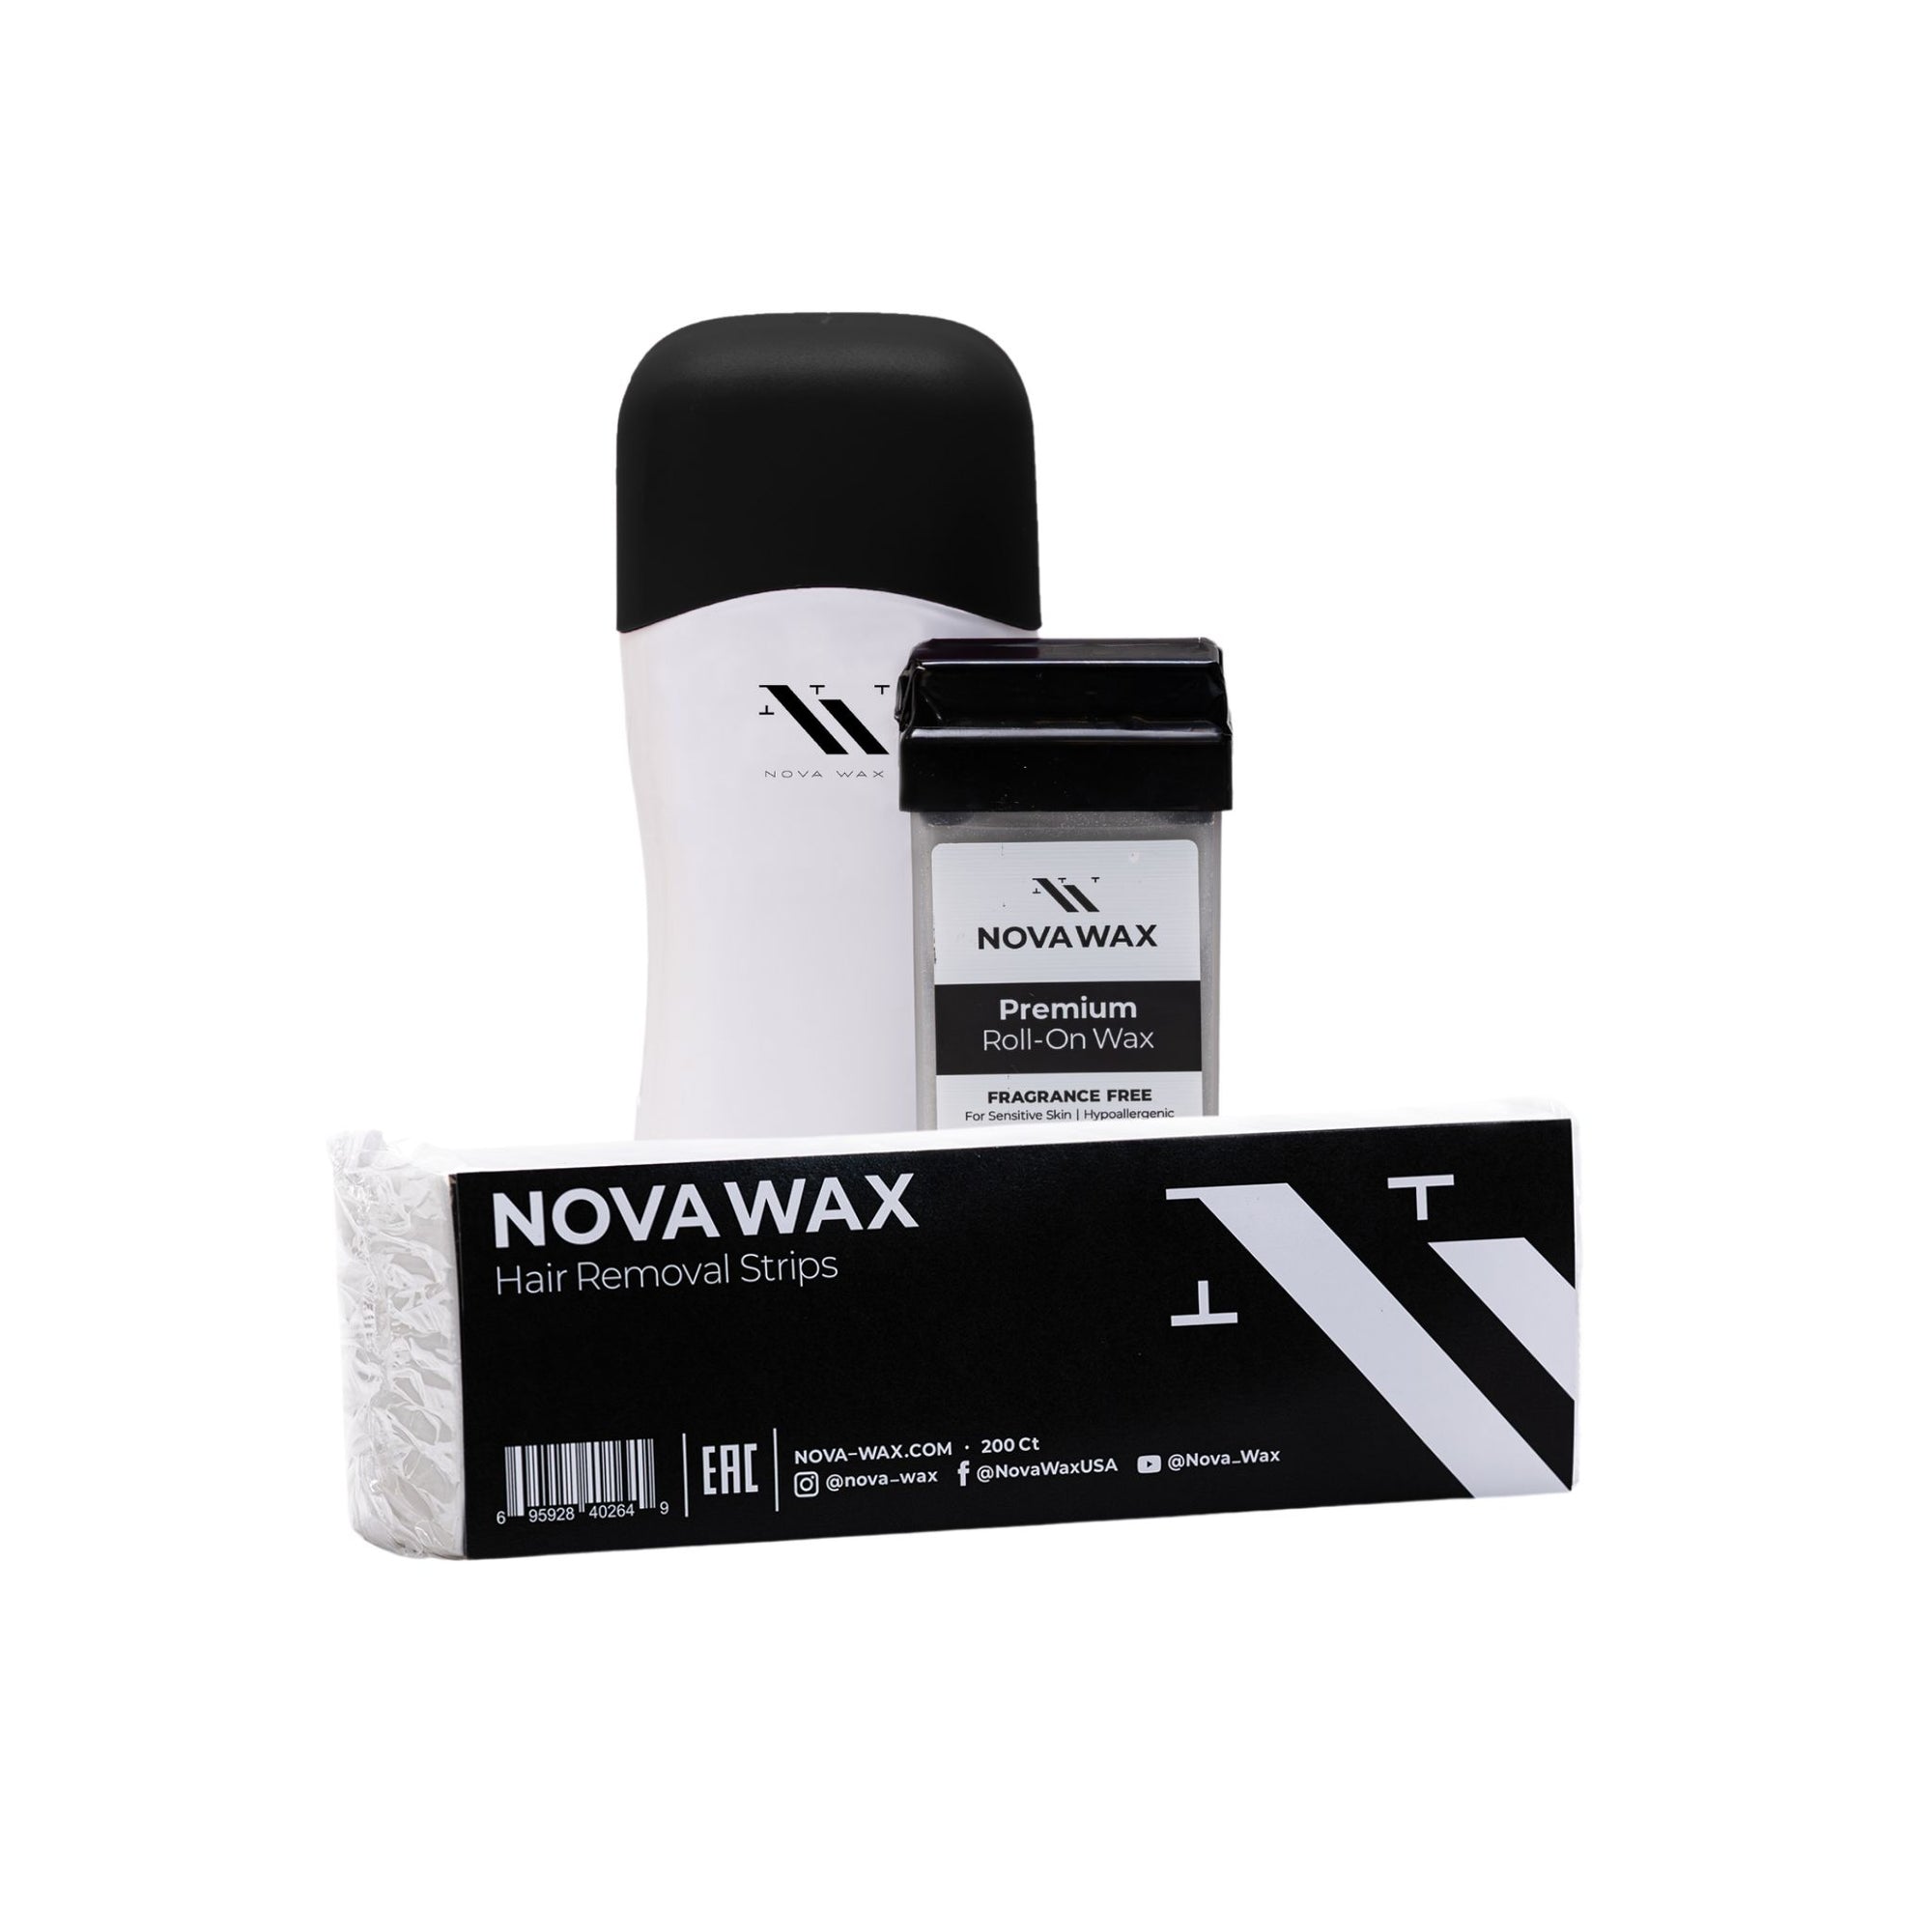 nova wax fragrance free roll on bundle with roll on warmer, roll on wax cartridge, and pack of removal strips